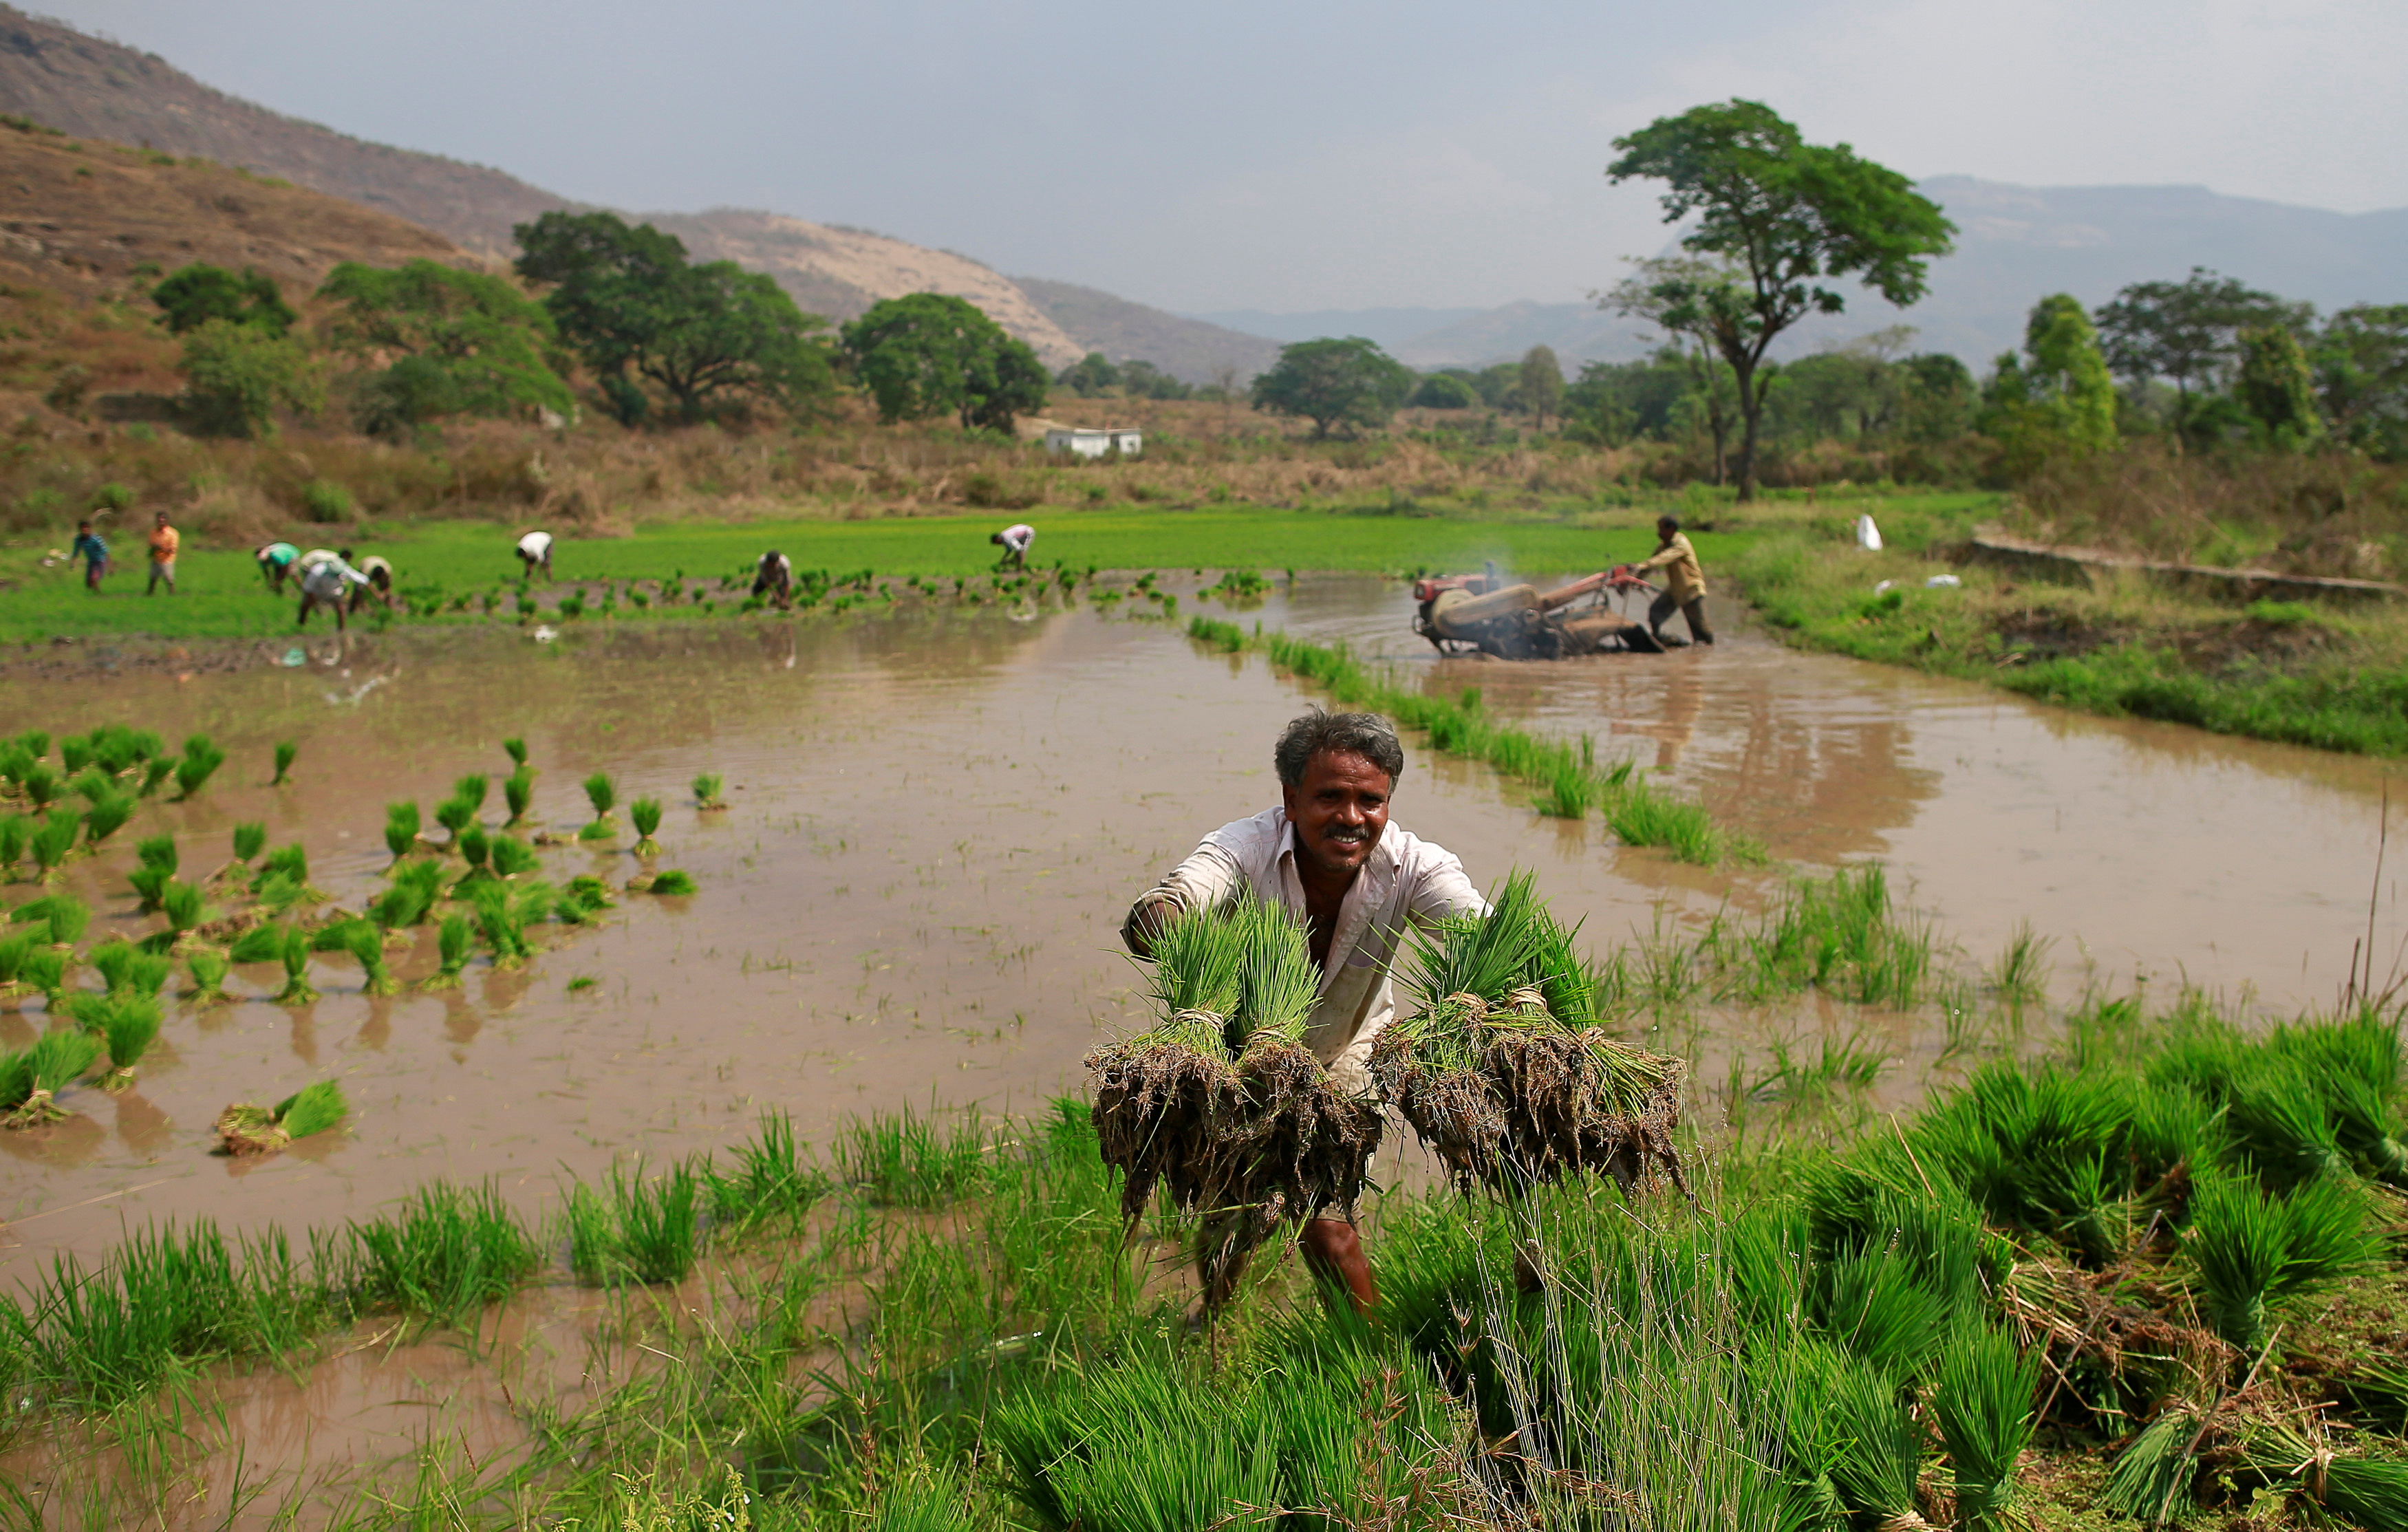 A laborer throws rice saplings as others plant them in another field in Karjat